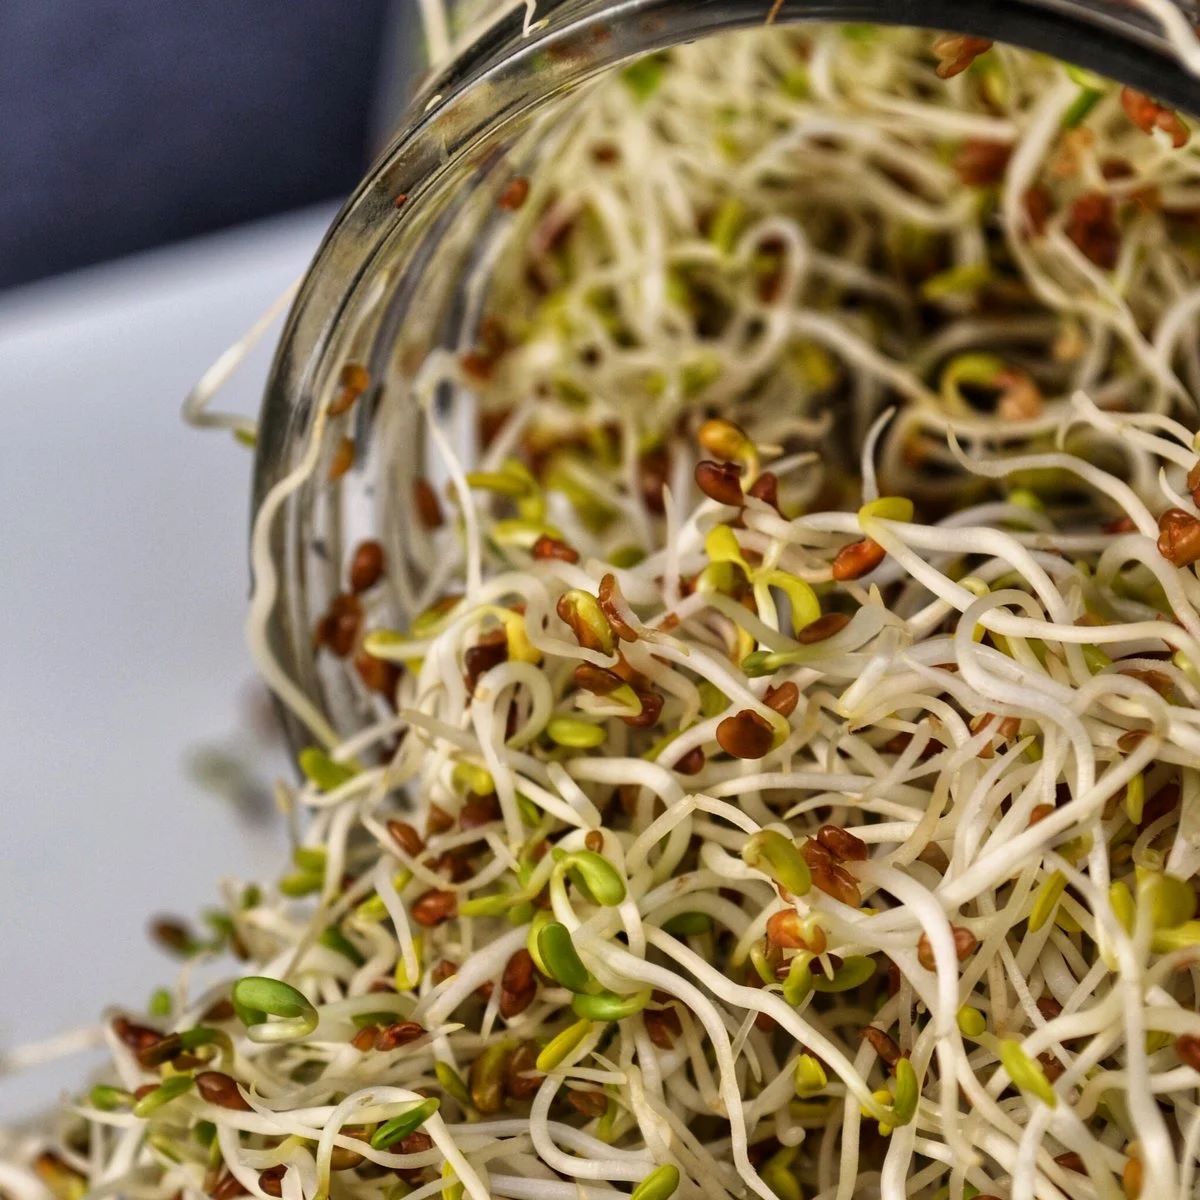 How To Store Sprouts After Sprouting